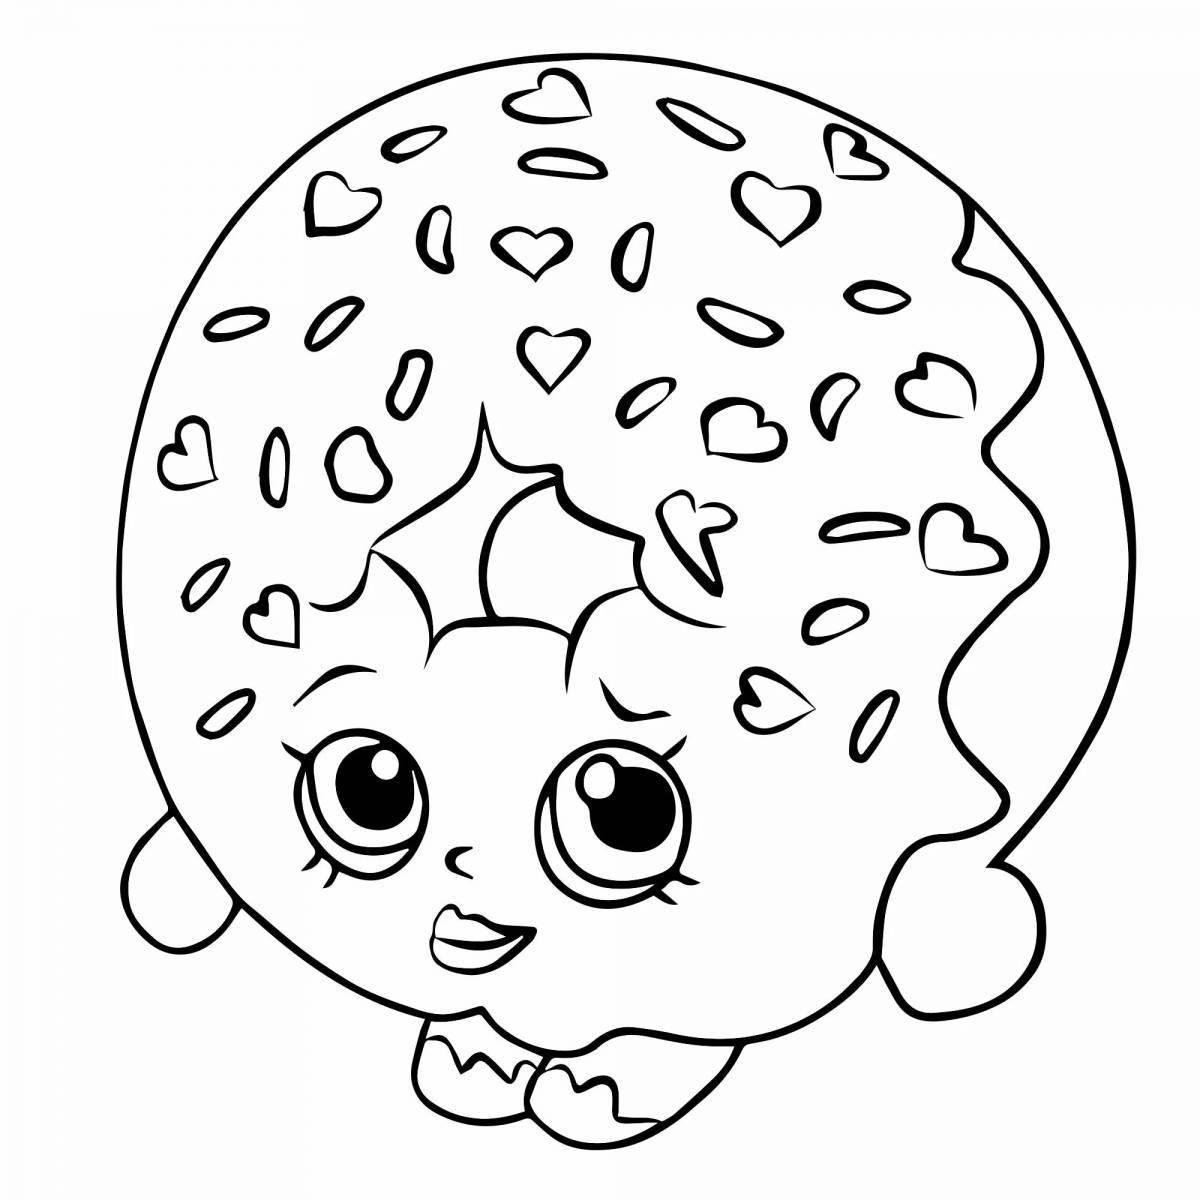 Funky donut coloring page for kids